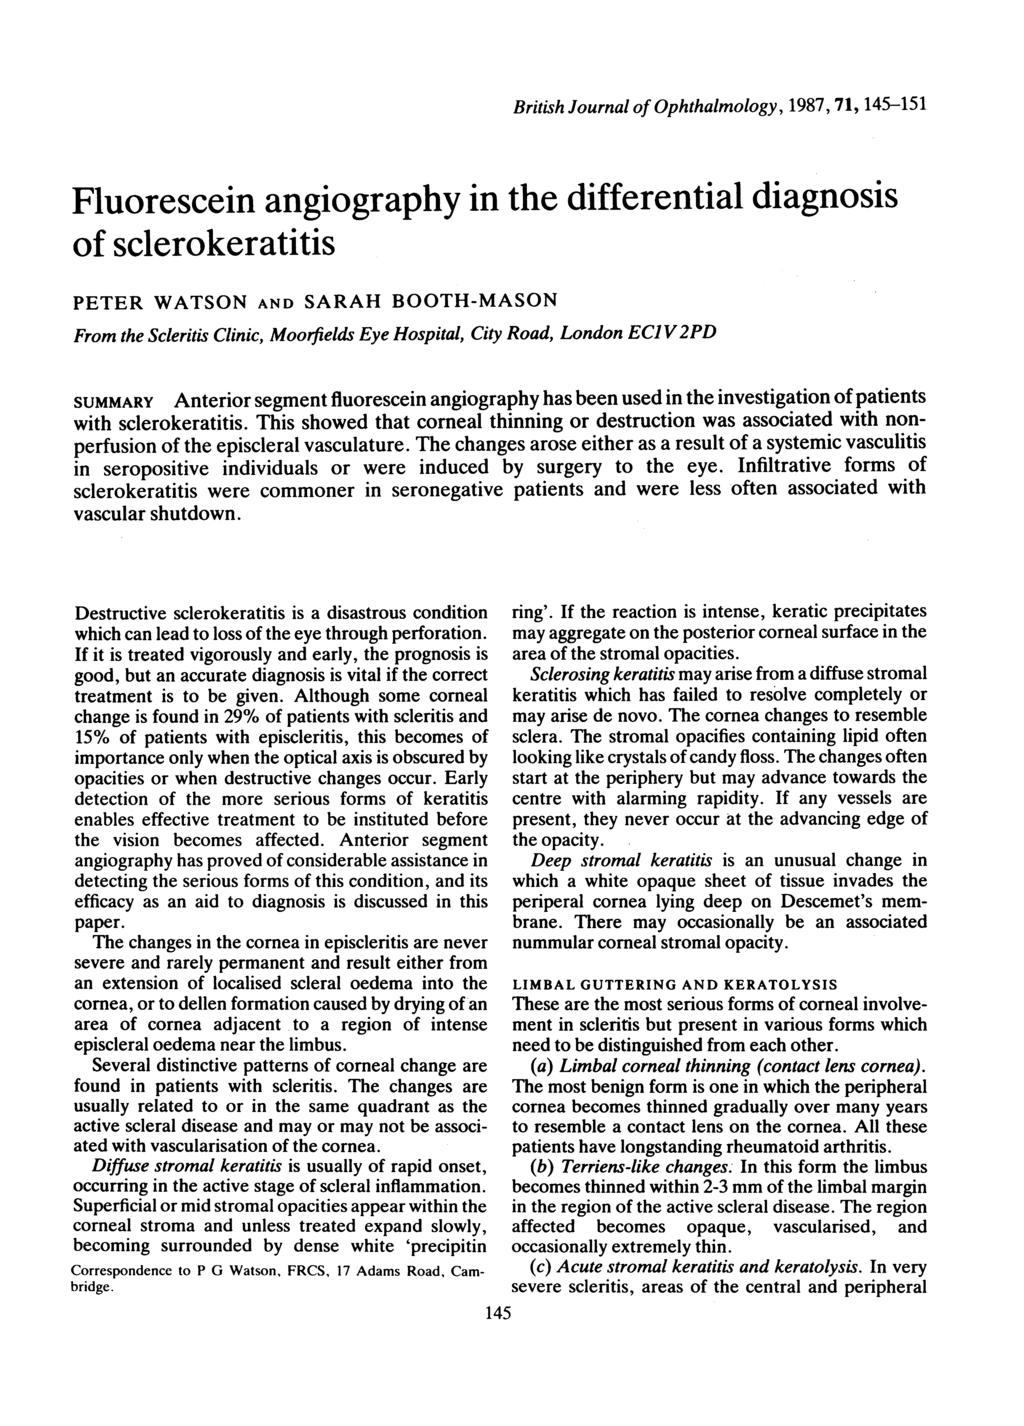 British Journal of Ophthalmology, 1987, 71, 145-151 Fluorescein angiography in the differential diagnosis of sclerokeratitis PETER WATSON AND SARAH BOOTH-MASON From the Scleritis Clinic, Moorfields